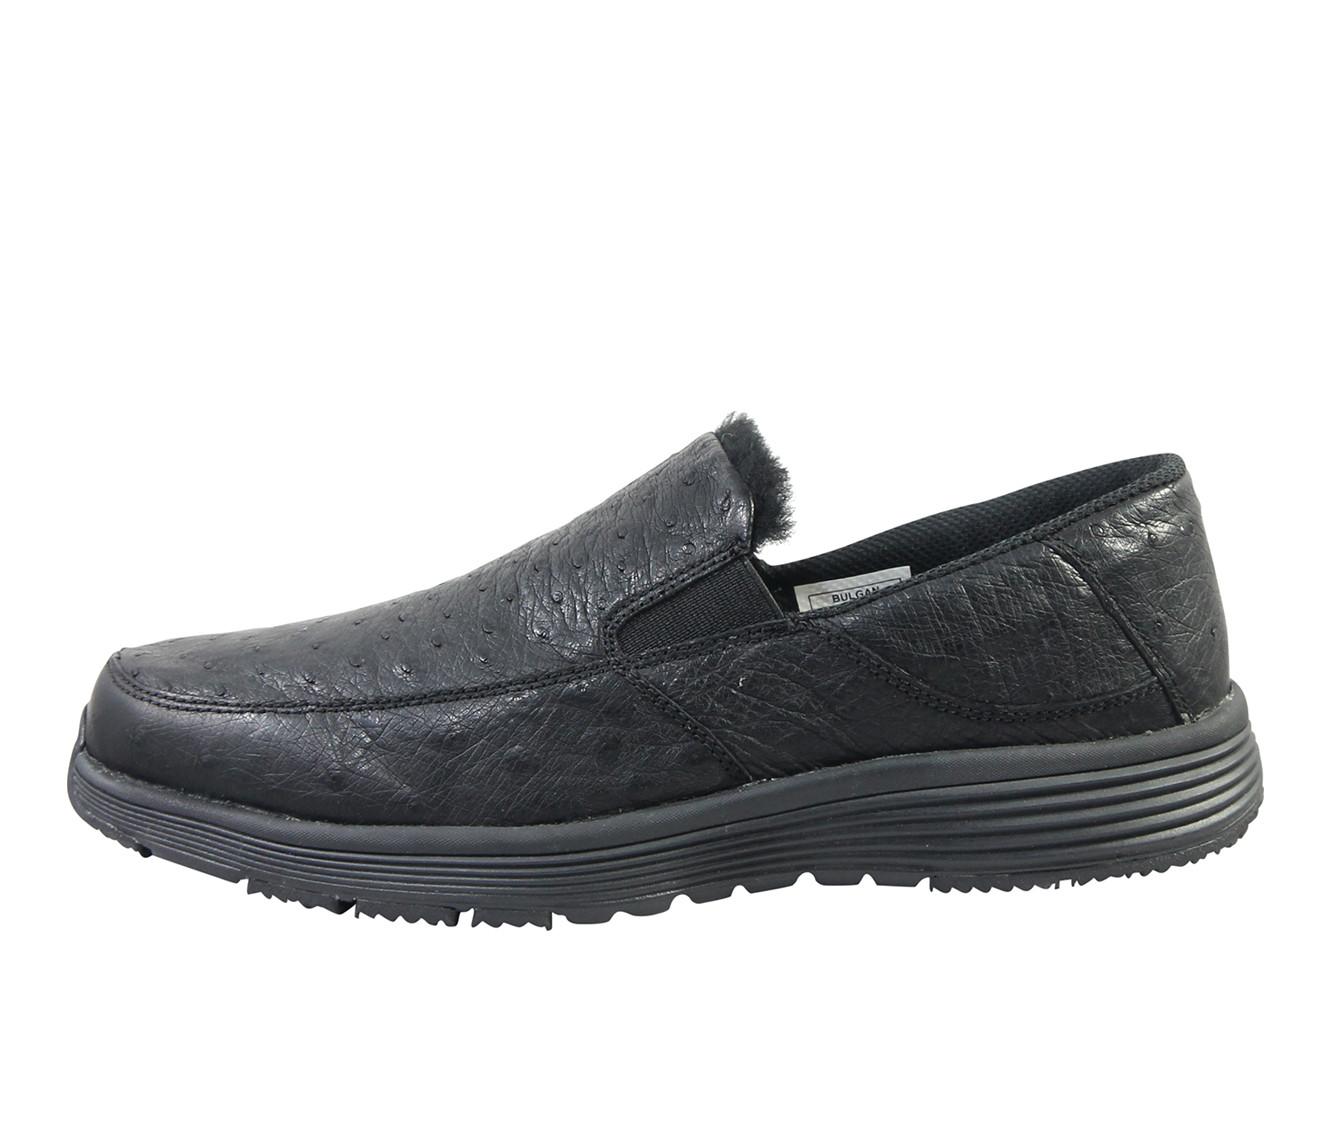 Superlamb Bulgan Ostrich Extended Sizes Casual Loafers